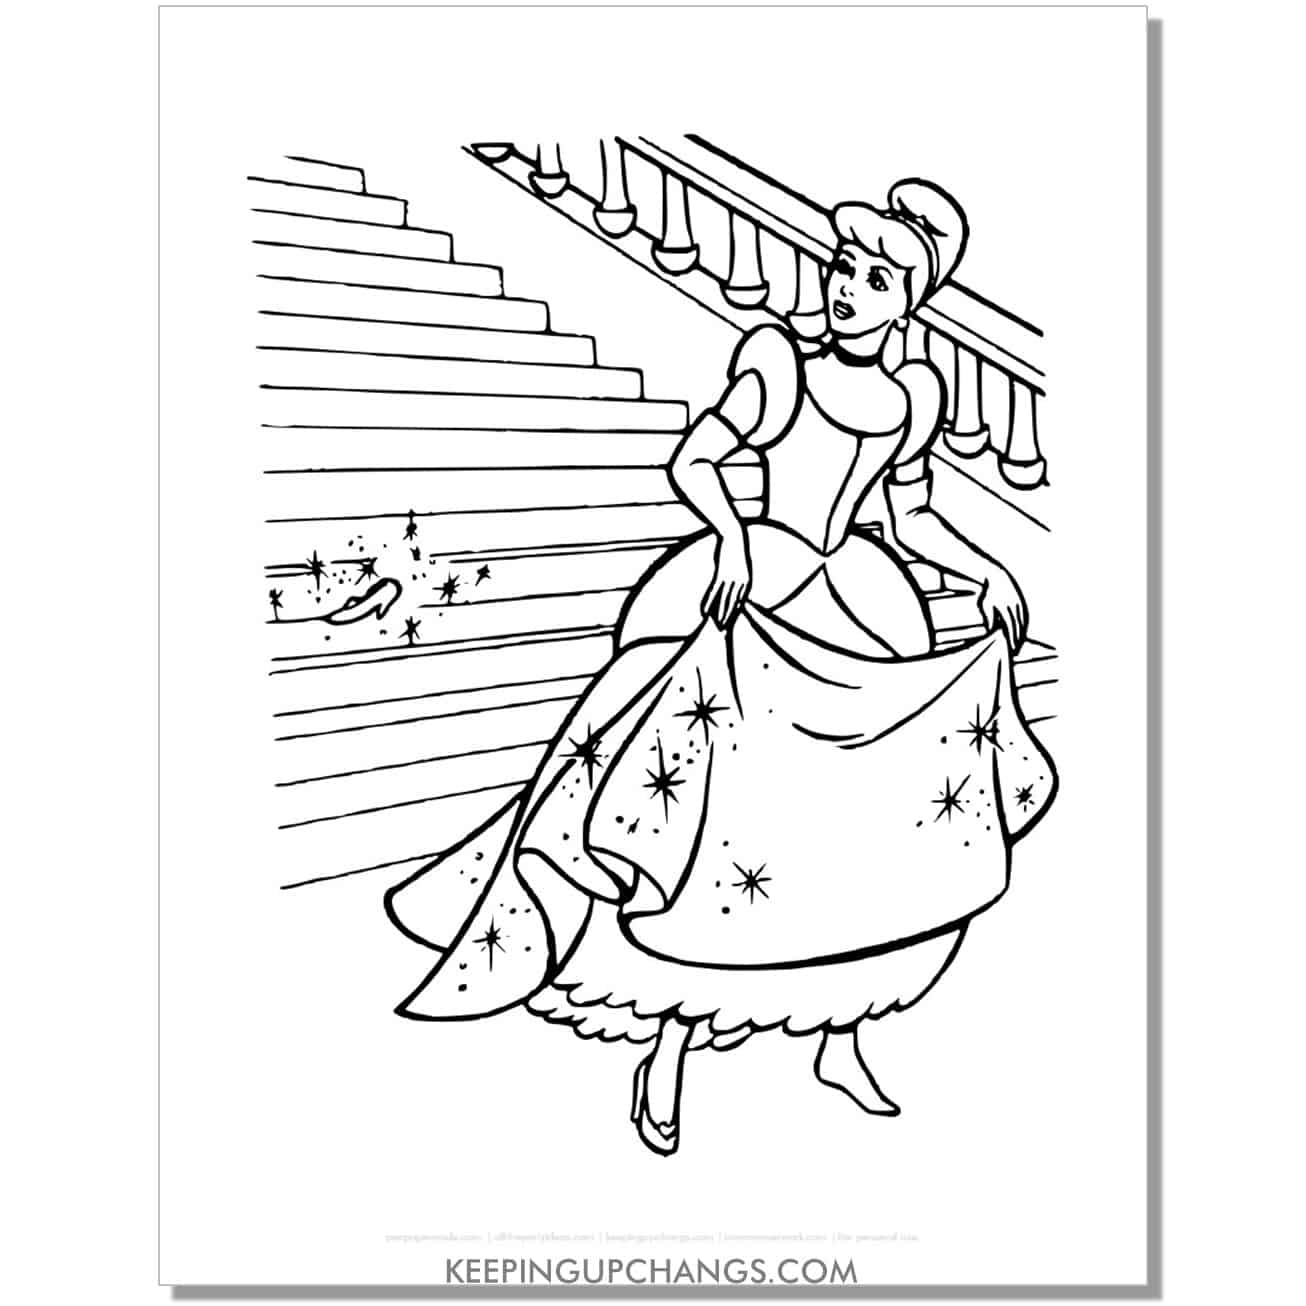 cinderella loses glass slipper coloring page, sheet.